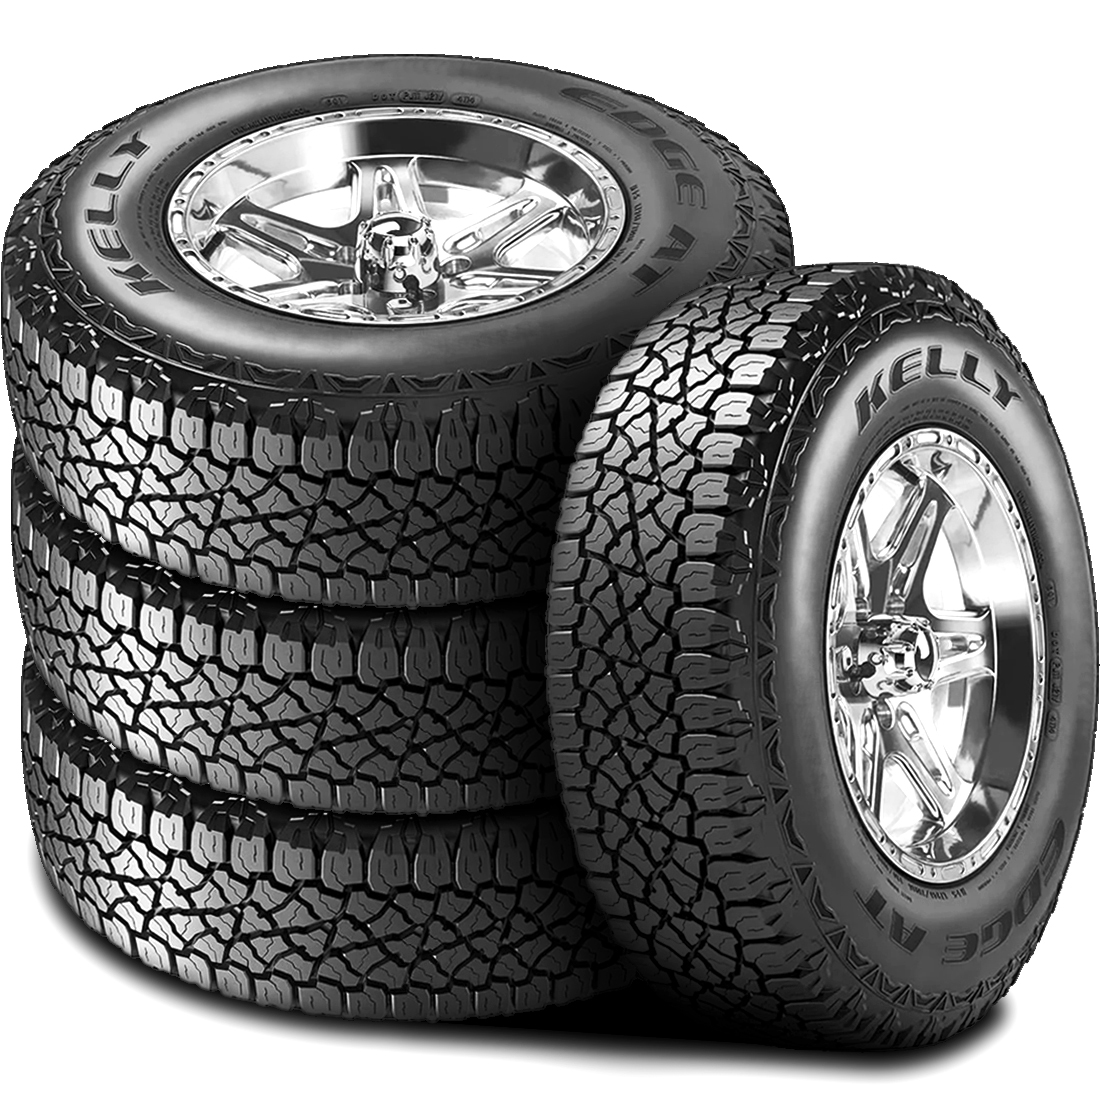 Kelly 4 Tires Kelly (Goodyear) Edge A/T LT 265/70R17 Load E 10 Ply AT All Terrain